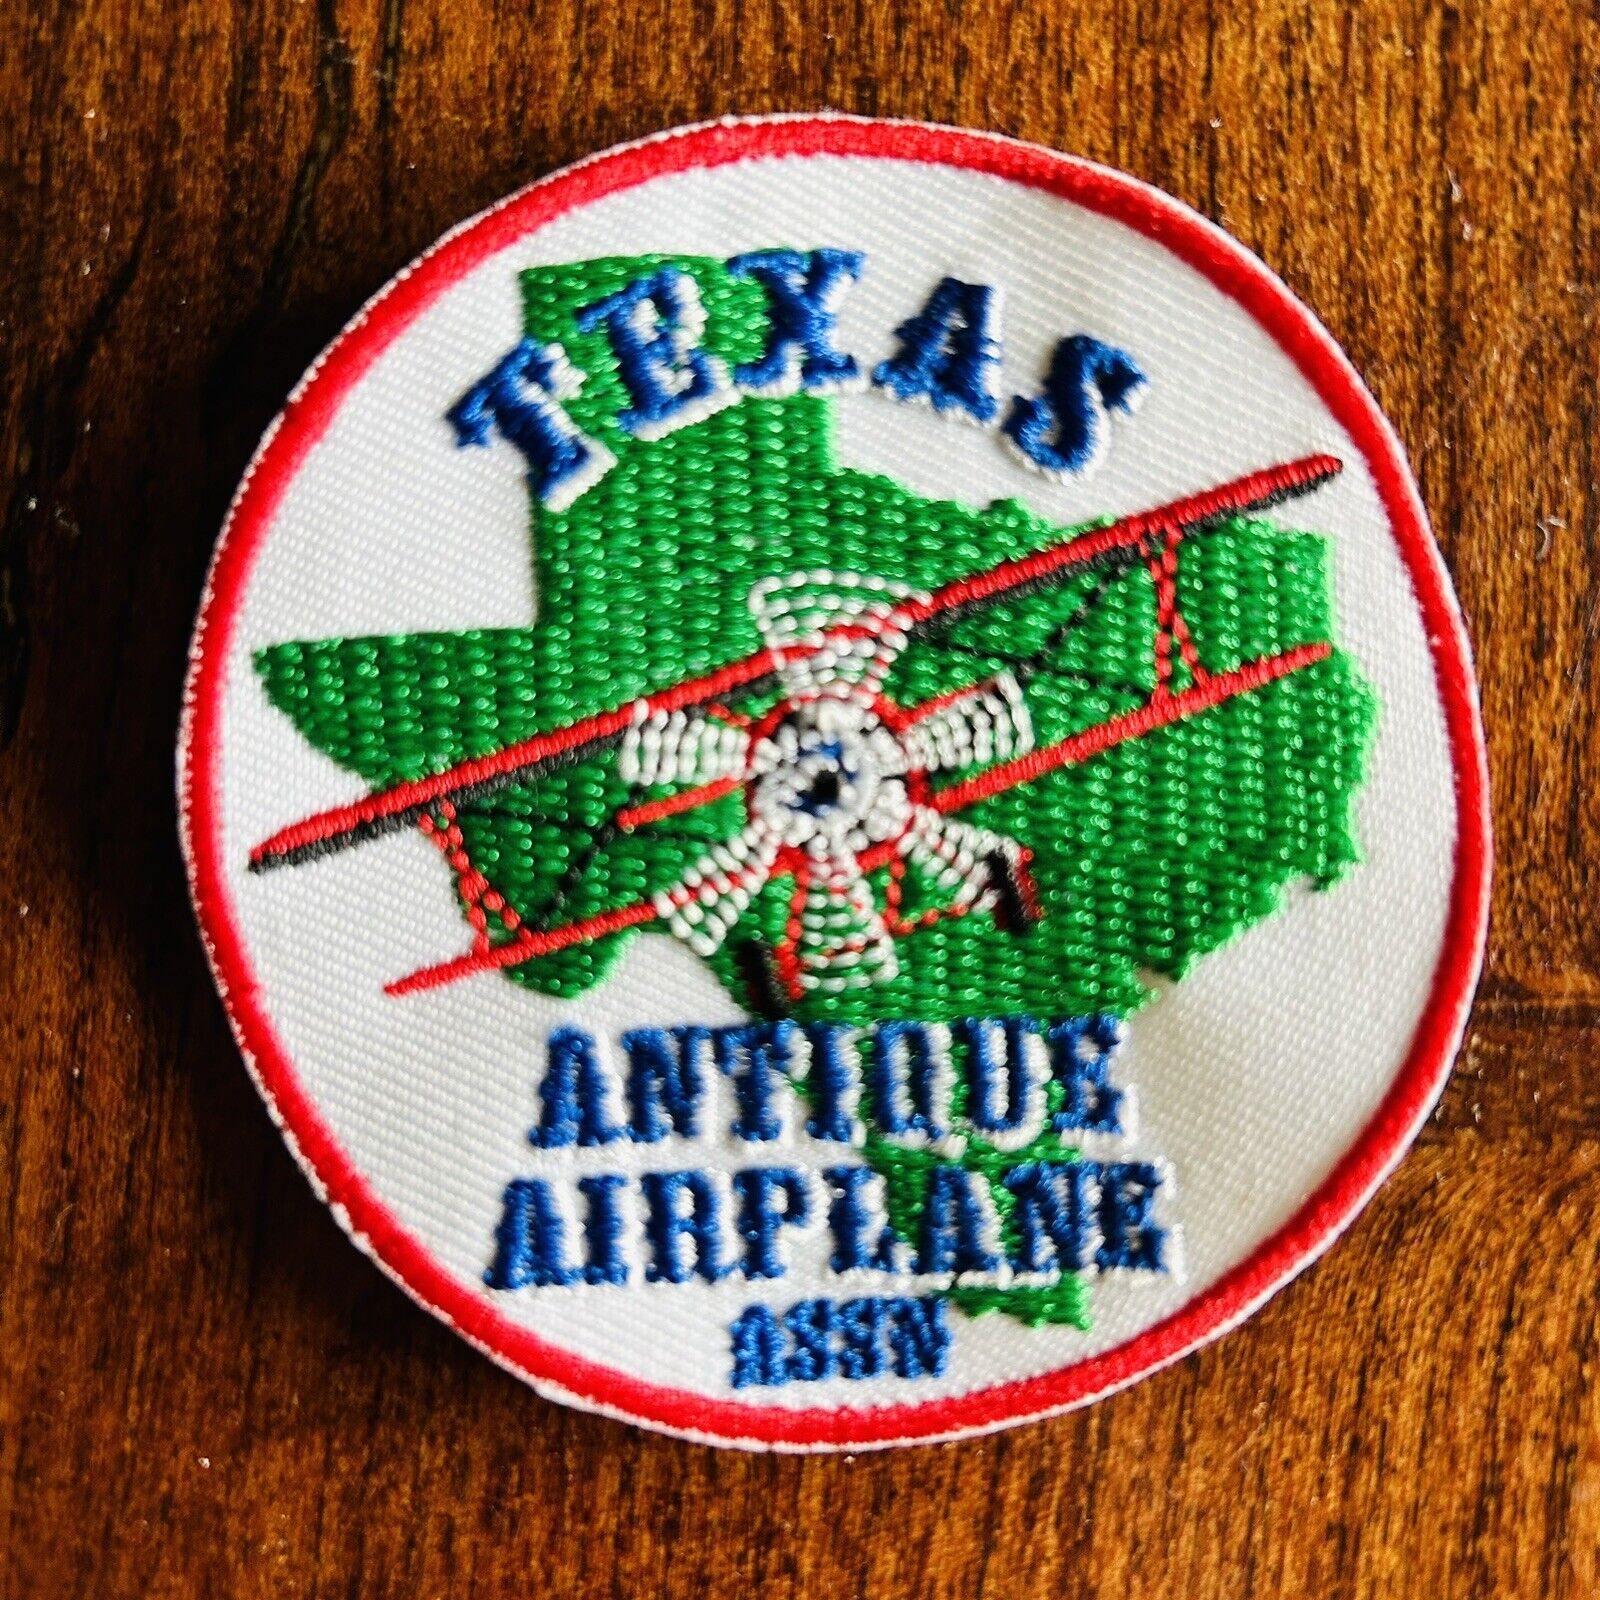 Texas Antique Airplane Association Embroidered Patch